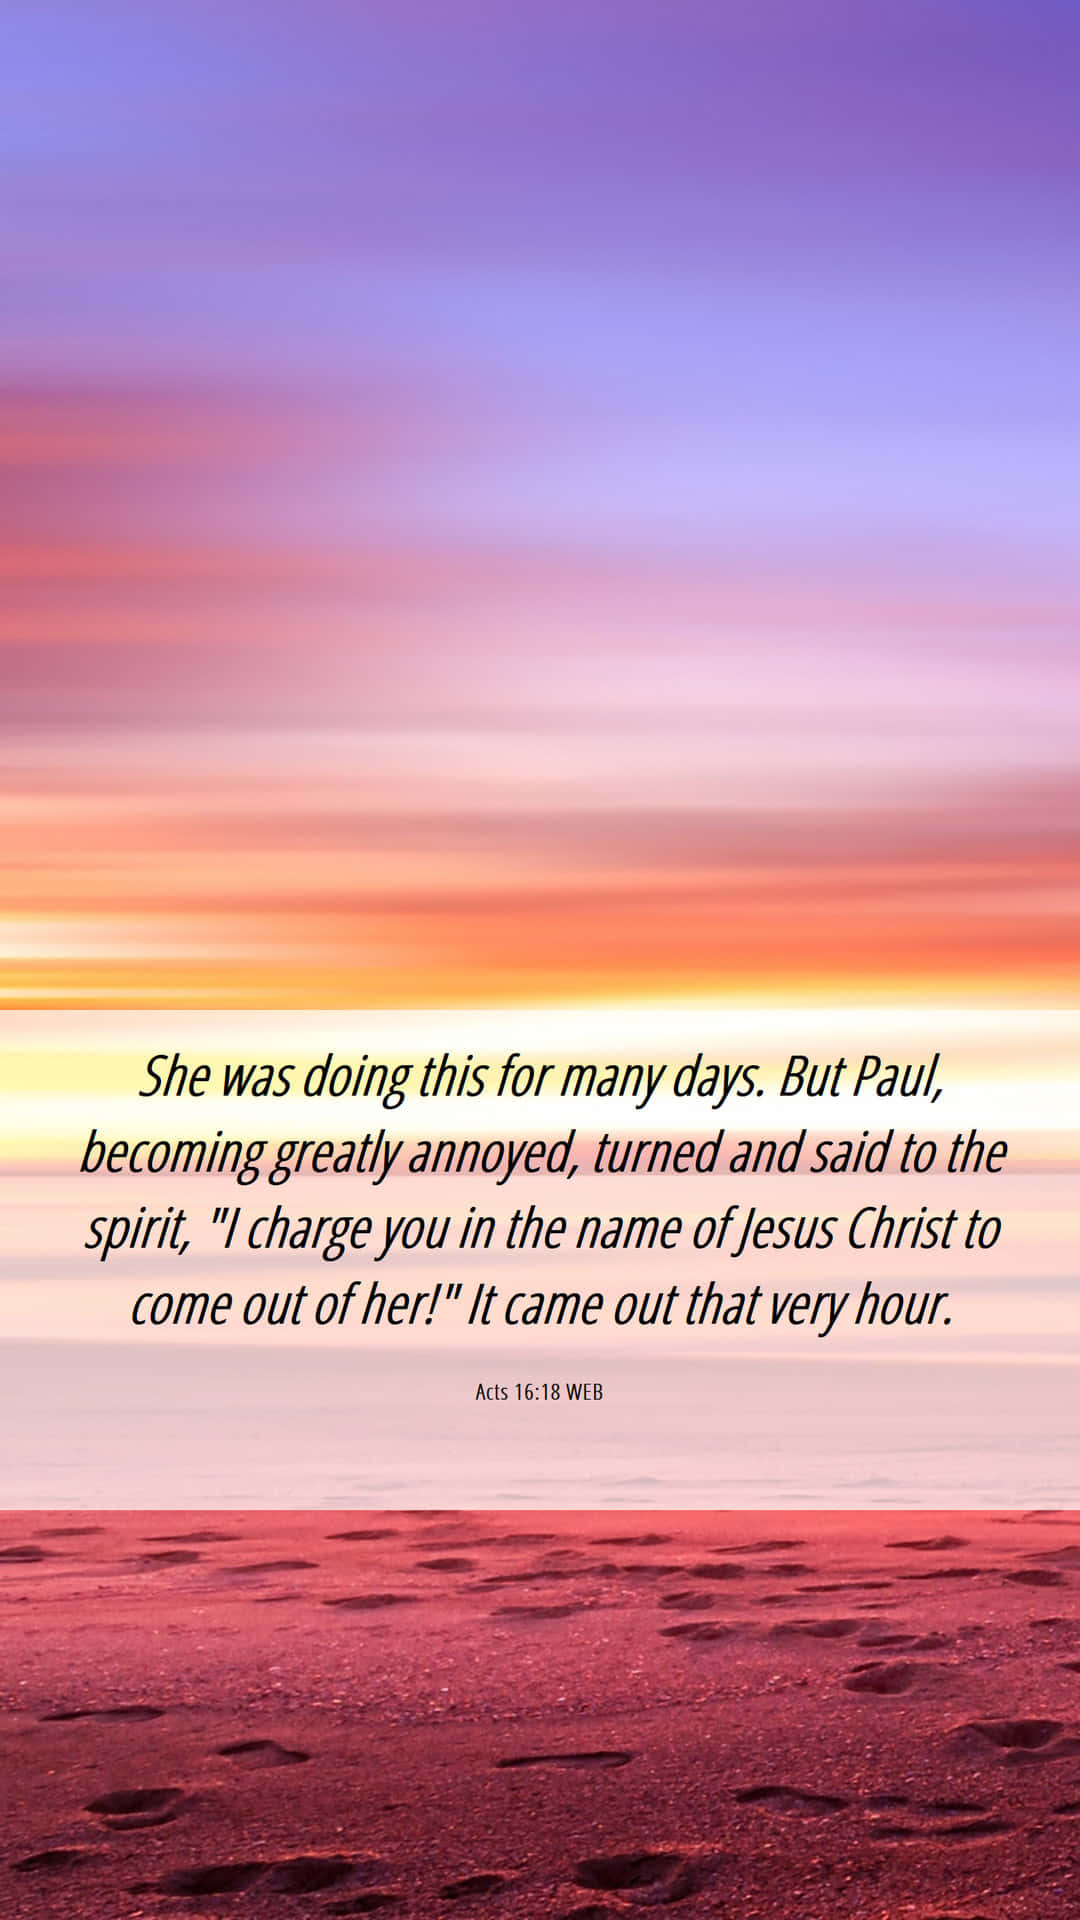 Sunset Inspired Bible Verse Acts1618 Wallpaper